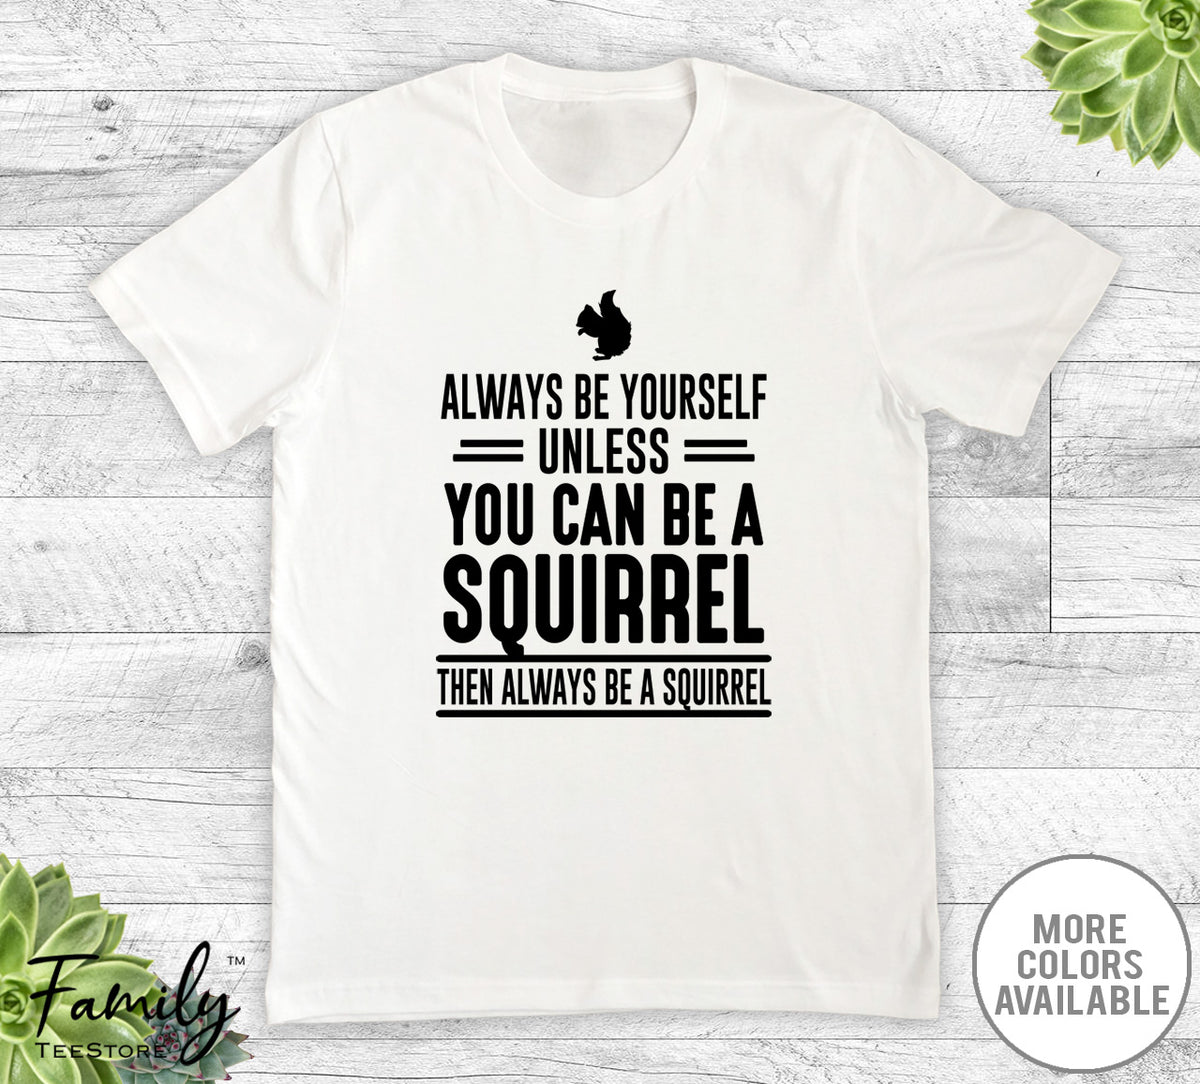 Always Be Yourself Unless You Can Be A Squirrel - Unisex T-shirt - Squirrel Shirt - Squirrel Gift - familyteeprints